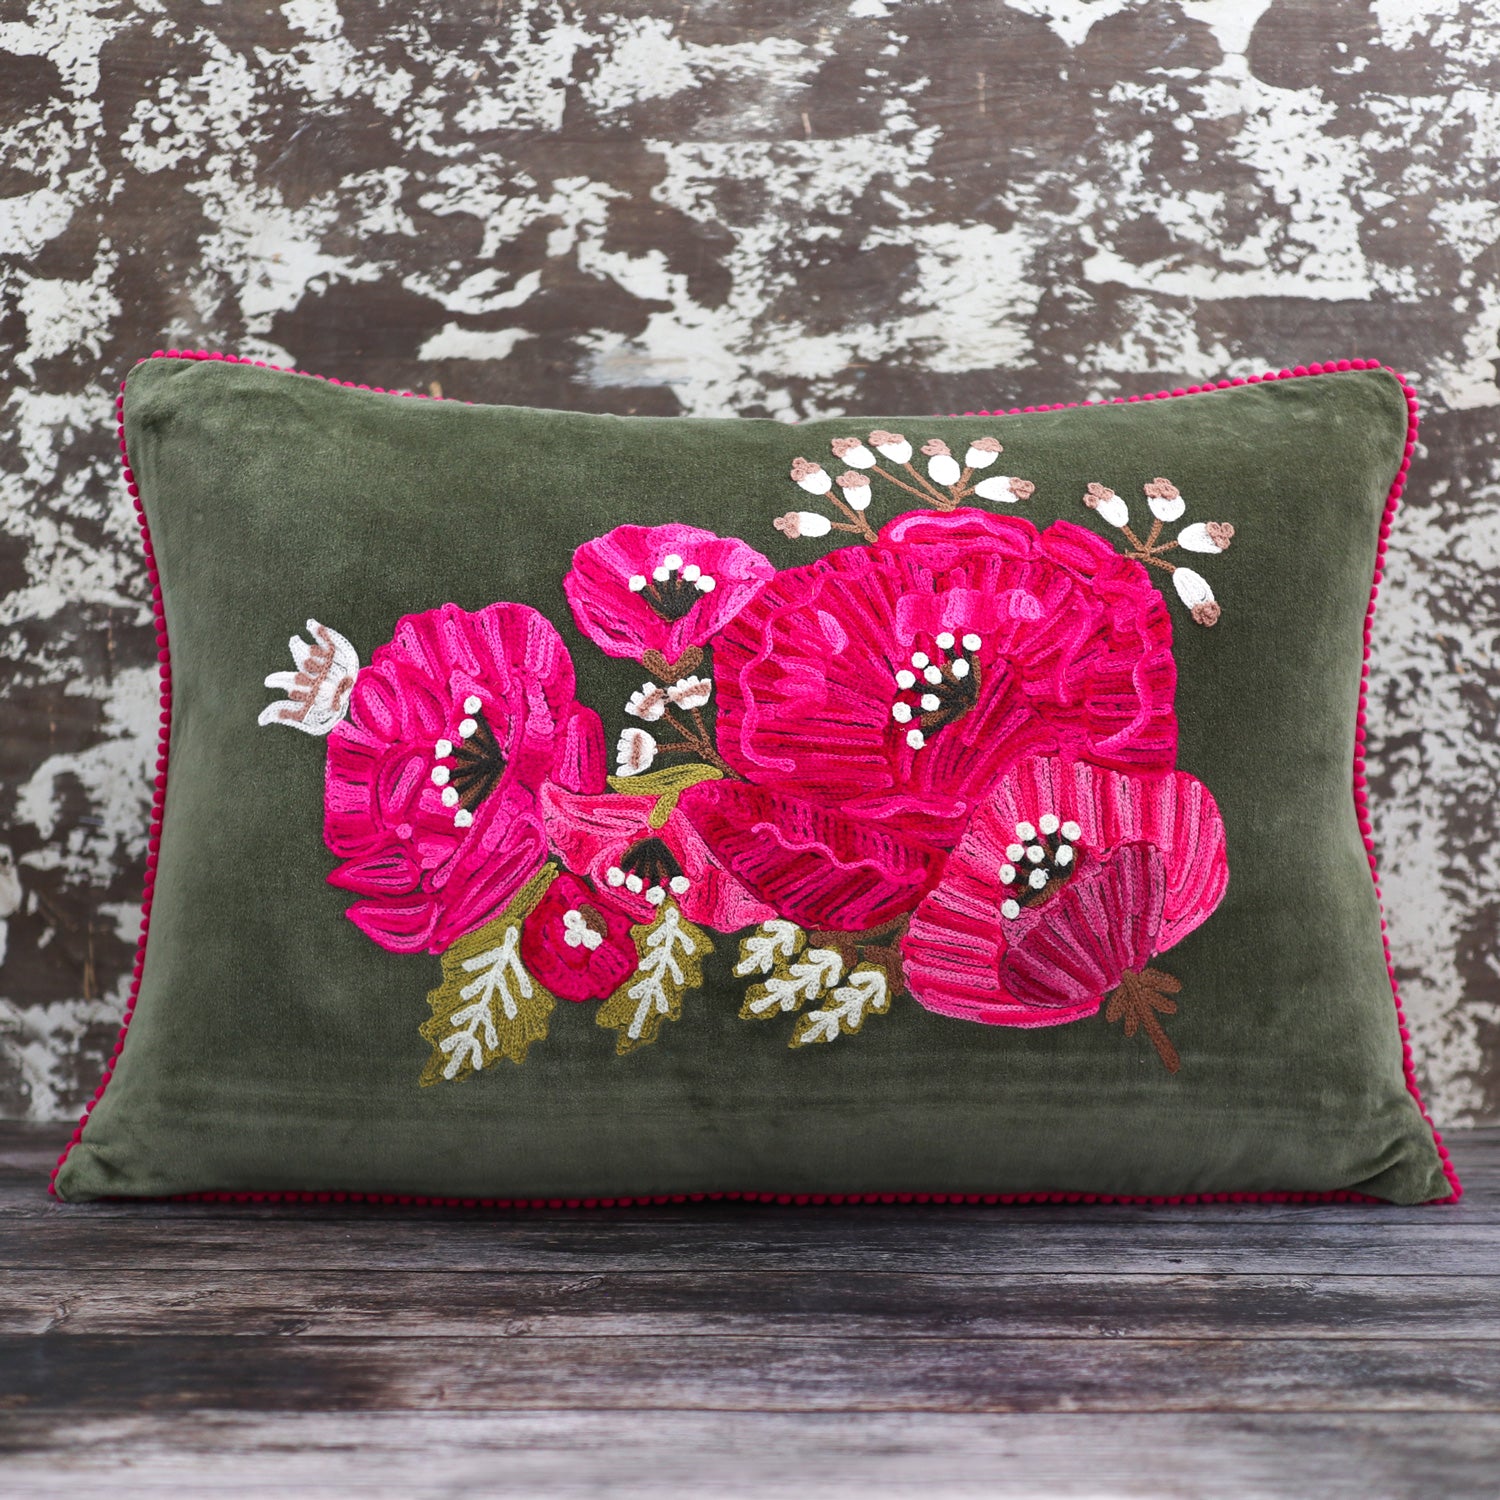 A Vinegar Hill own brand cushion is shown, an olive green velvet rectangular cushion has intricate embroidery centred over majority of the front – three large blooms in shades of pink dominate, with smaller blooms in the same shades of bright pink and sprigs in cream and pale brown. There is foliage in green and cream and stems and stamens in shades of brown.